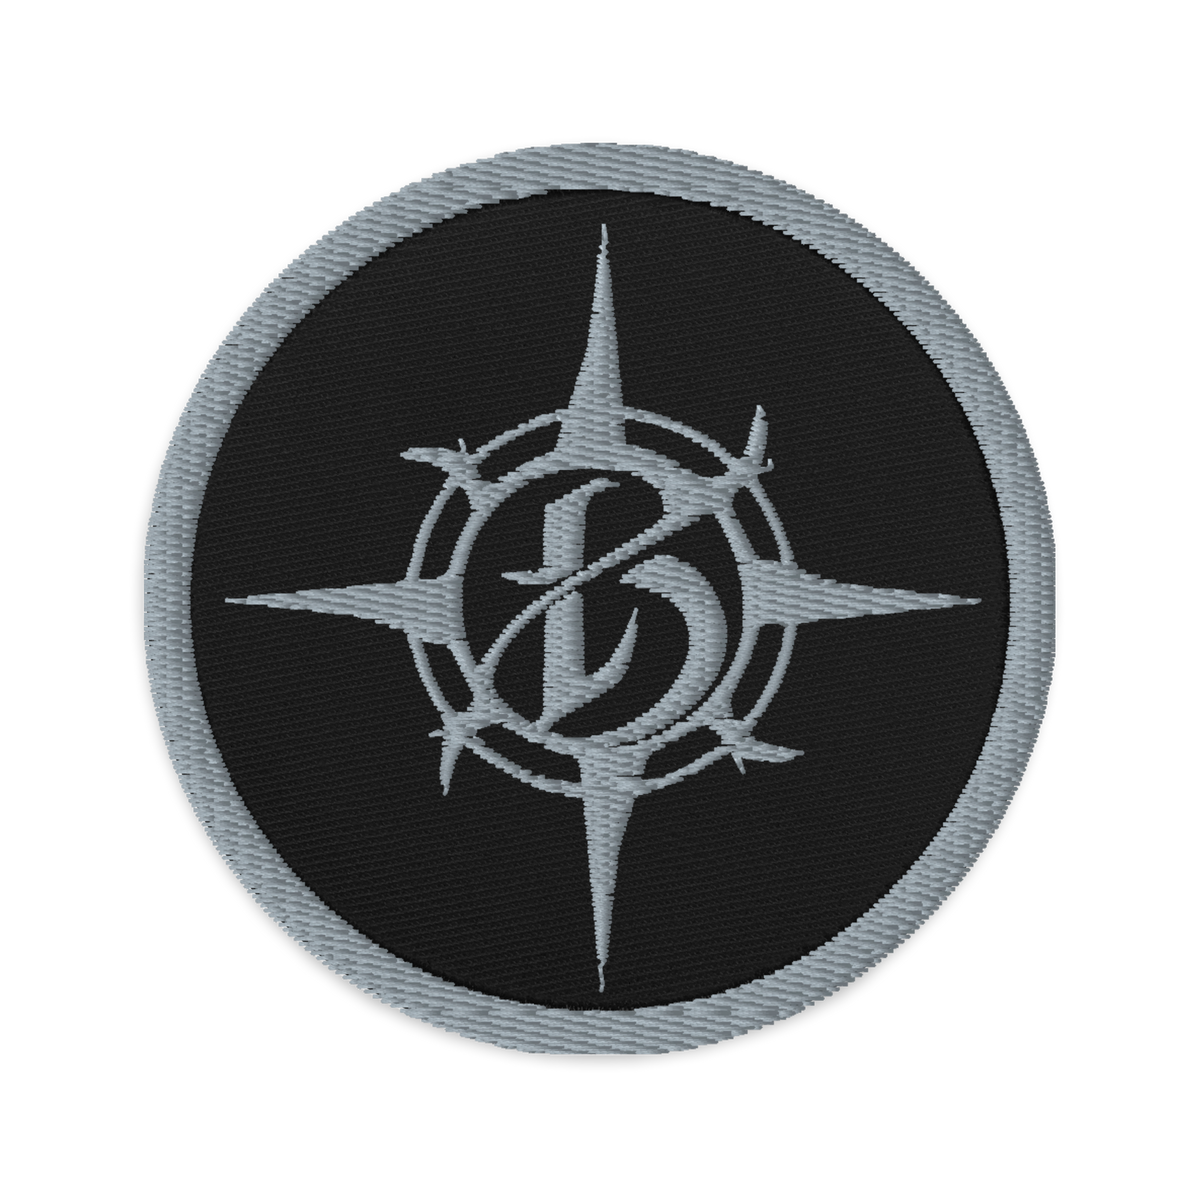 Borealis Compass Logo Embroidered Patch - Grey